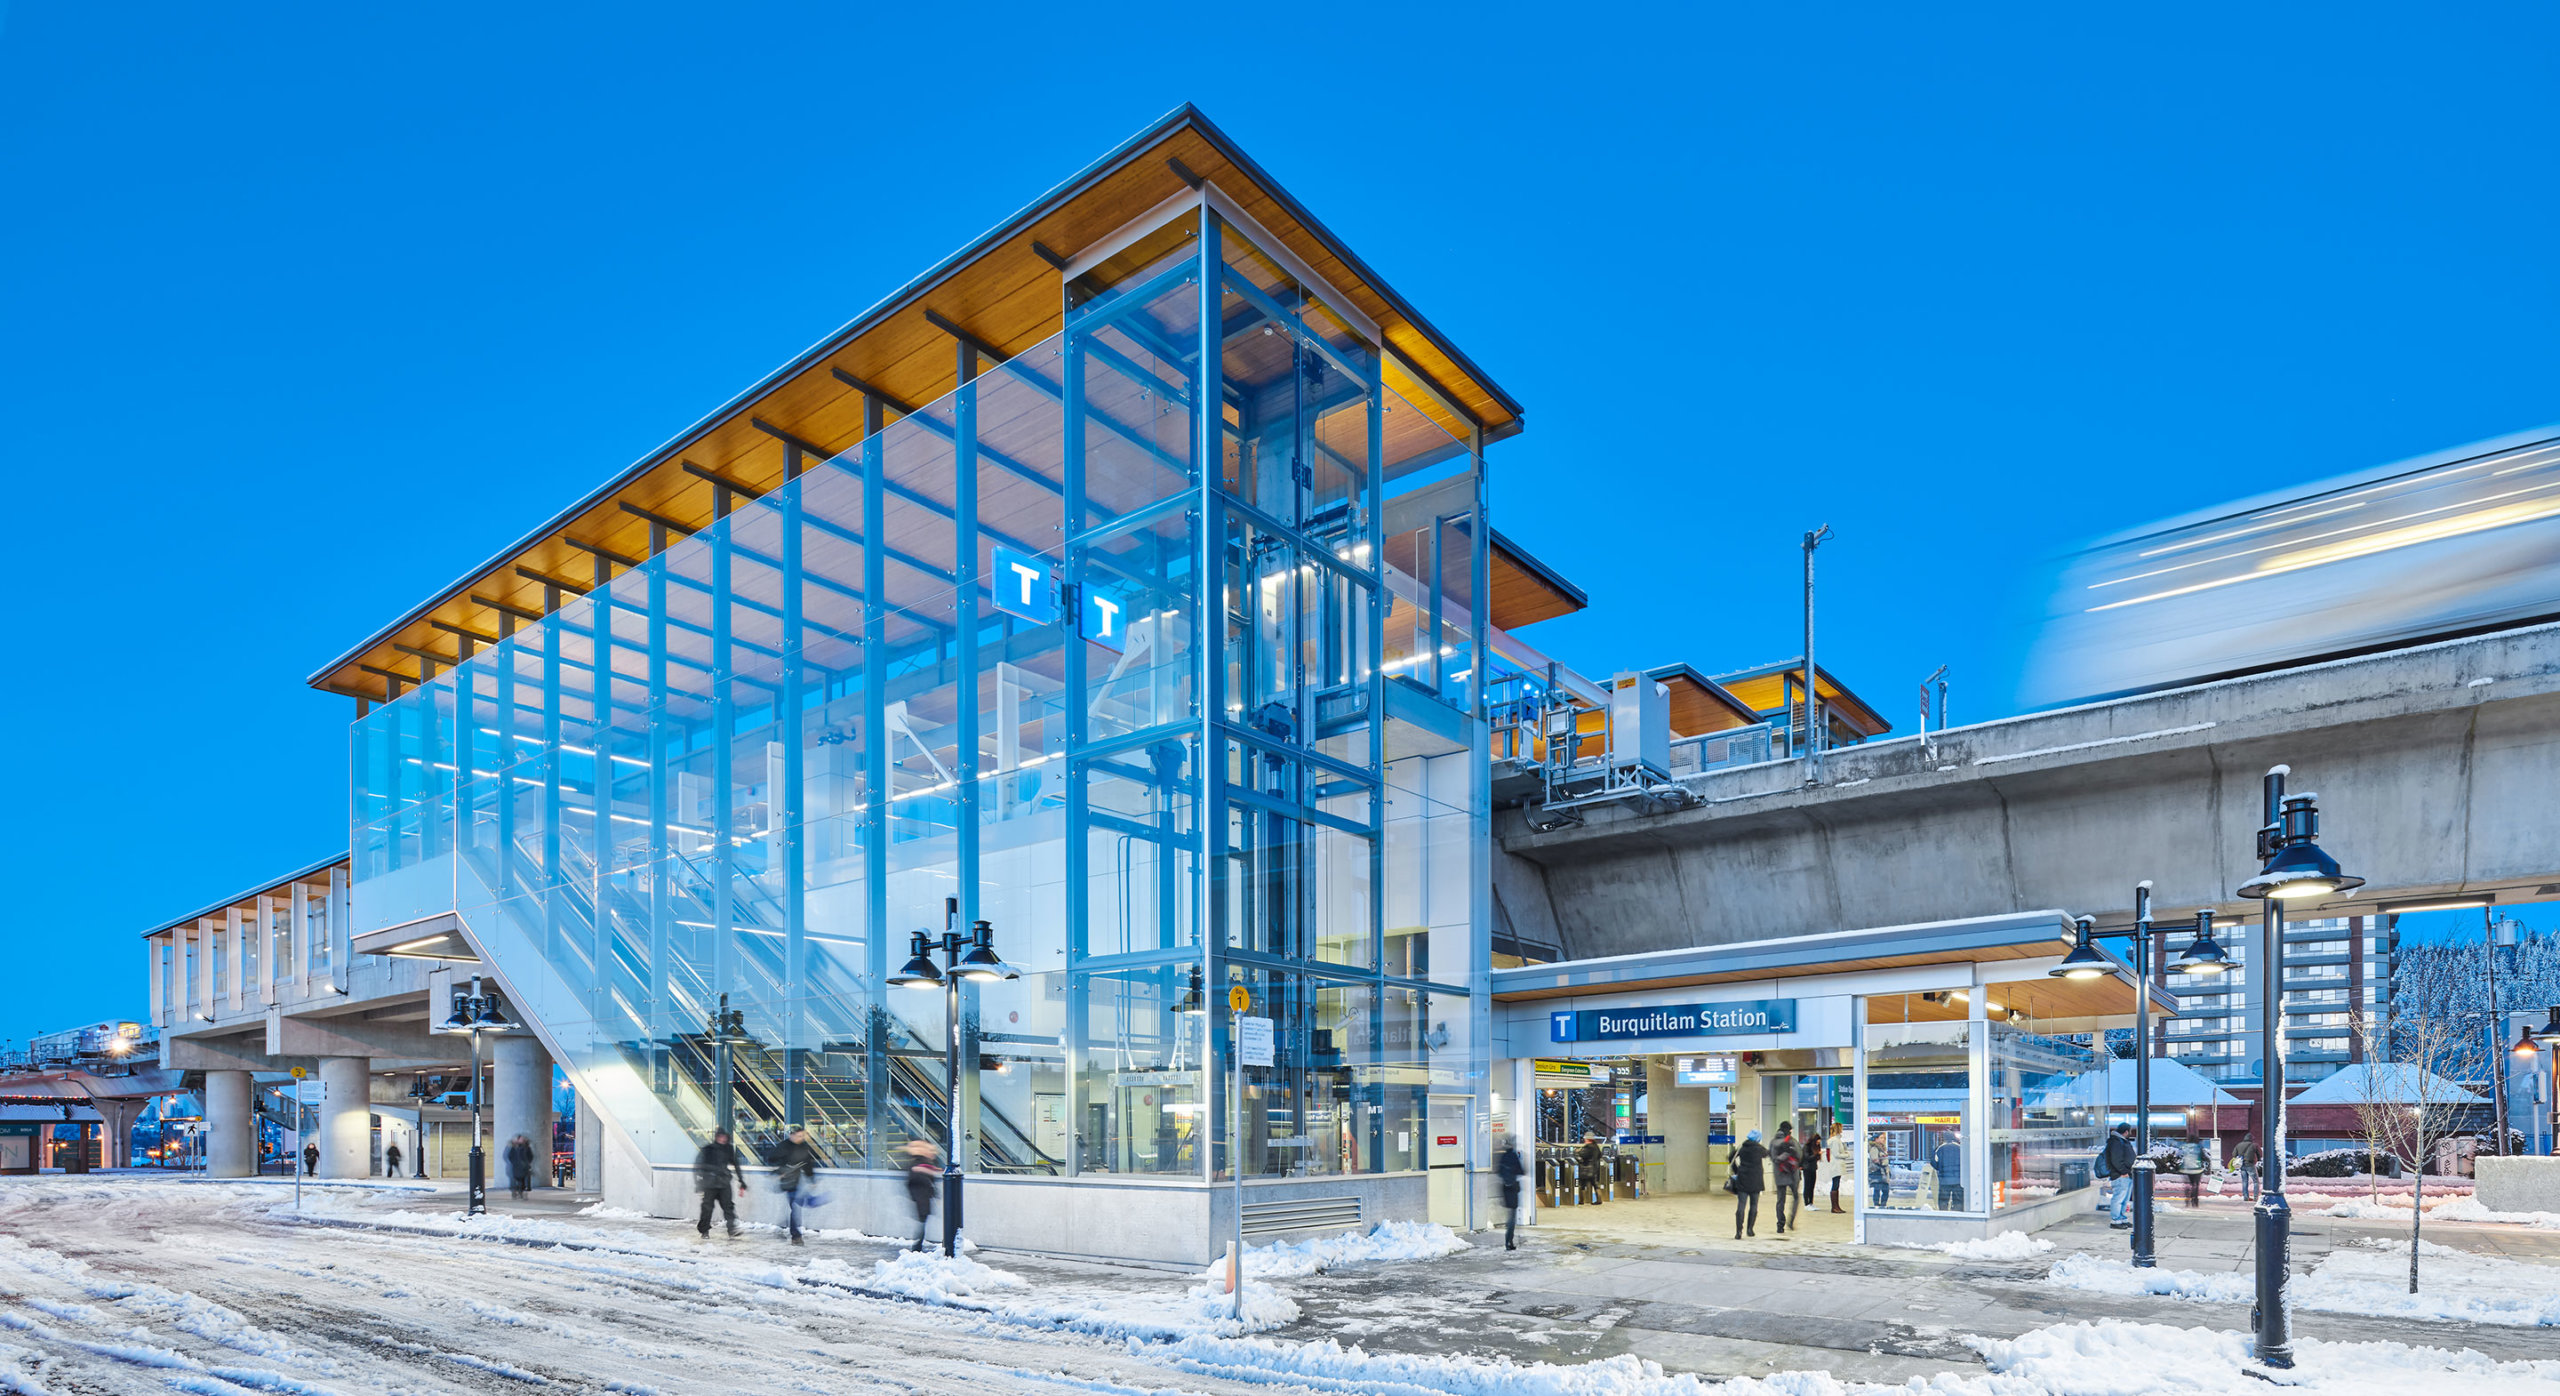 Entrance to Burquitlam station